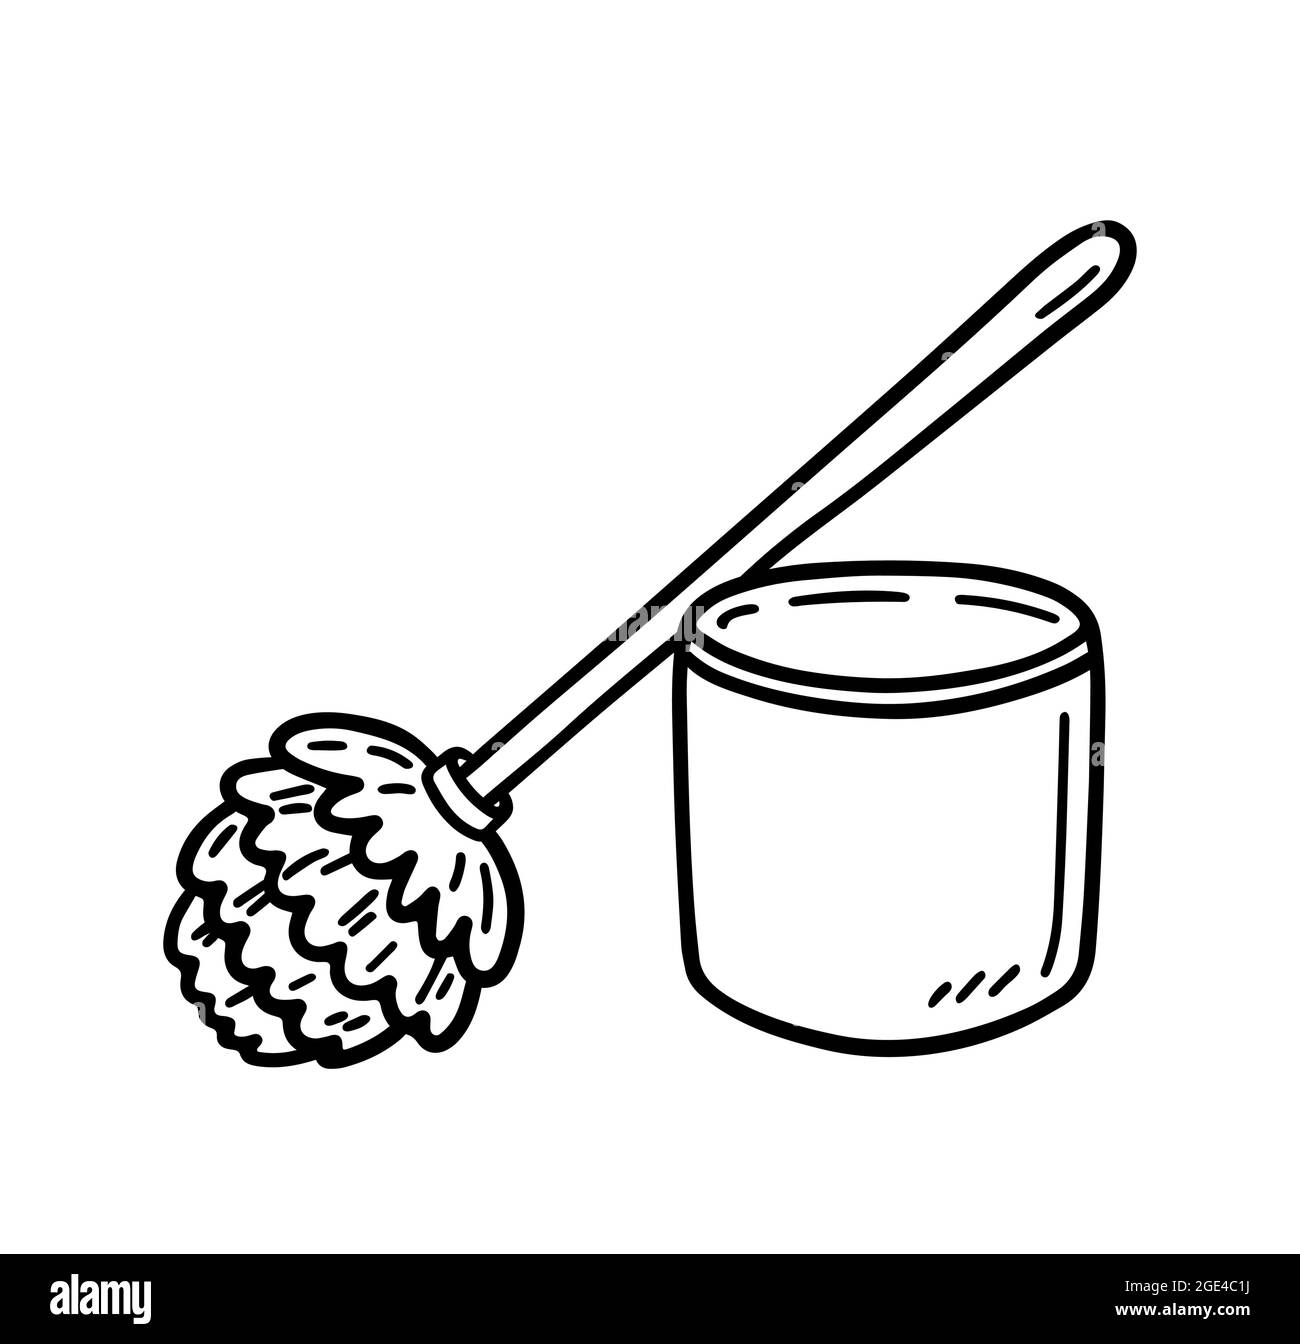 https://c8.alamy.com/comp/2GE4C1J/toilet-brush-isolated-on-white-background-tool-for-keeping-clean-vector-hand-drawn-illustration-in-doodle-style-suitable-for-your-projects-2GE4C1J.jpg